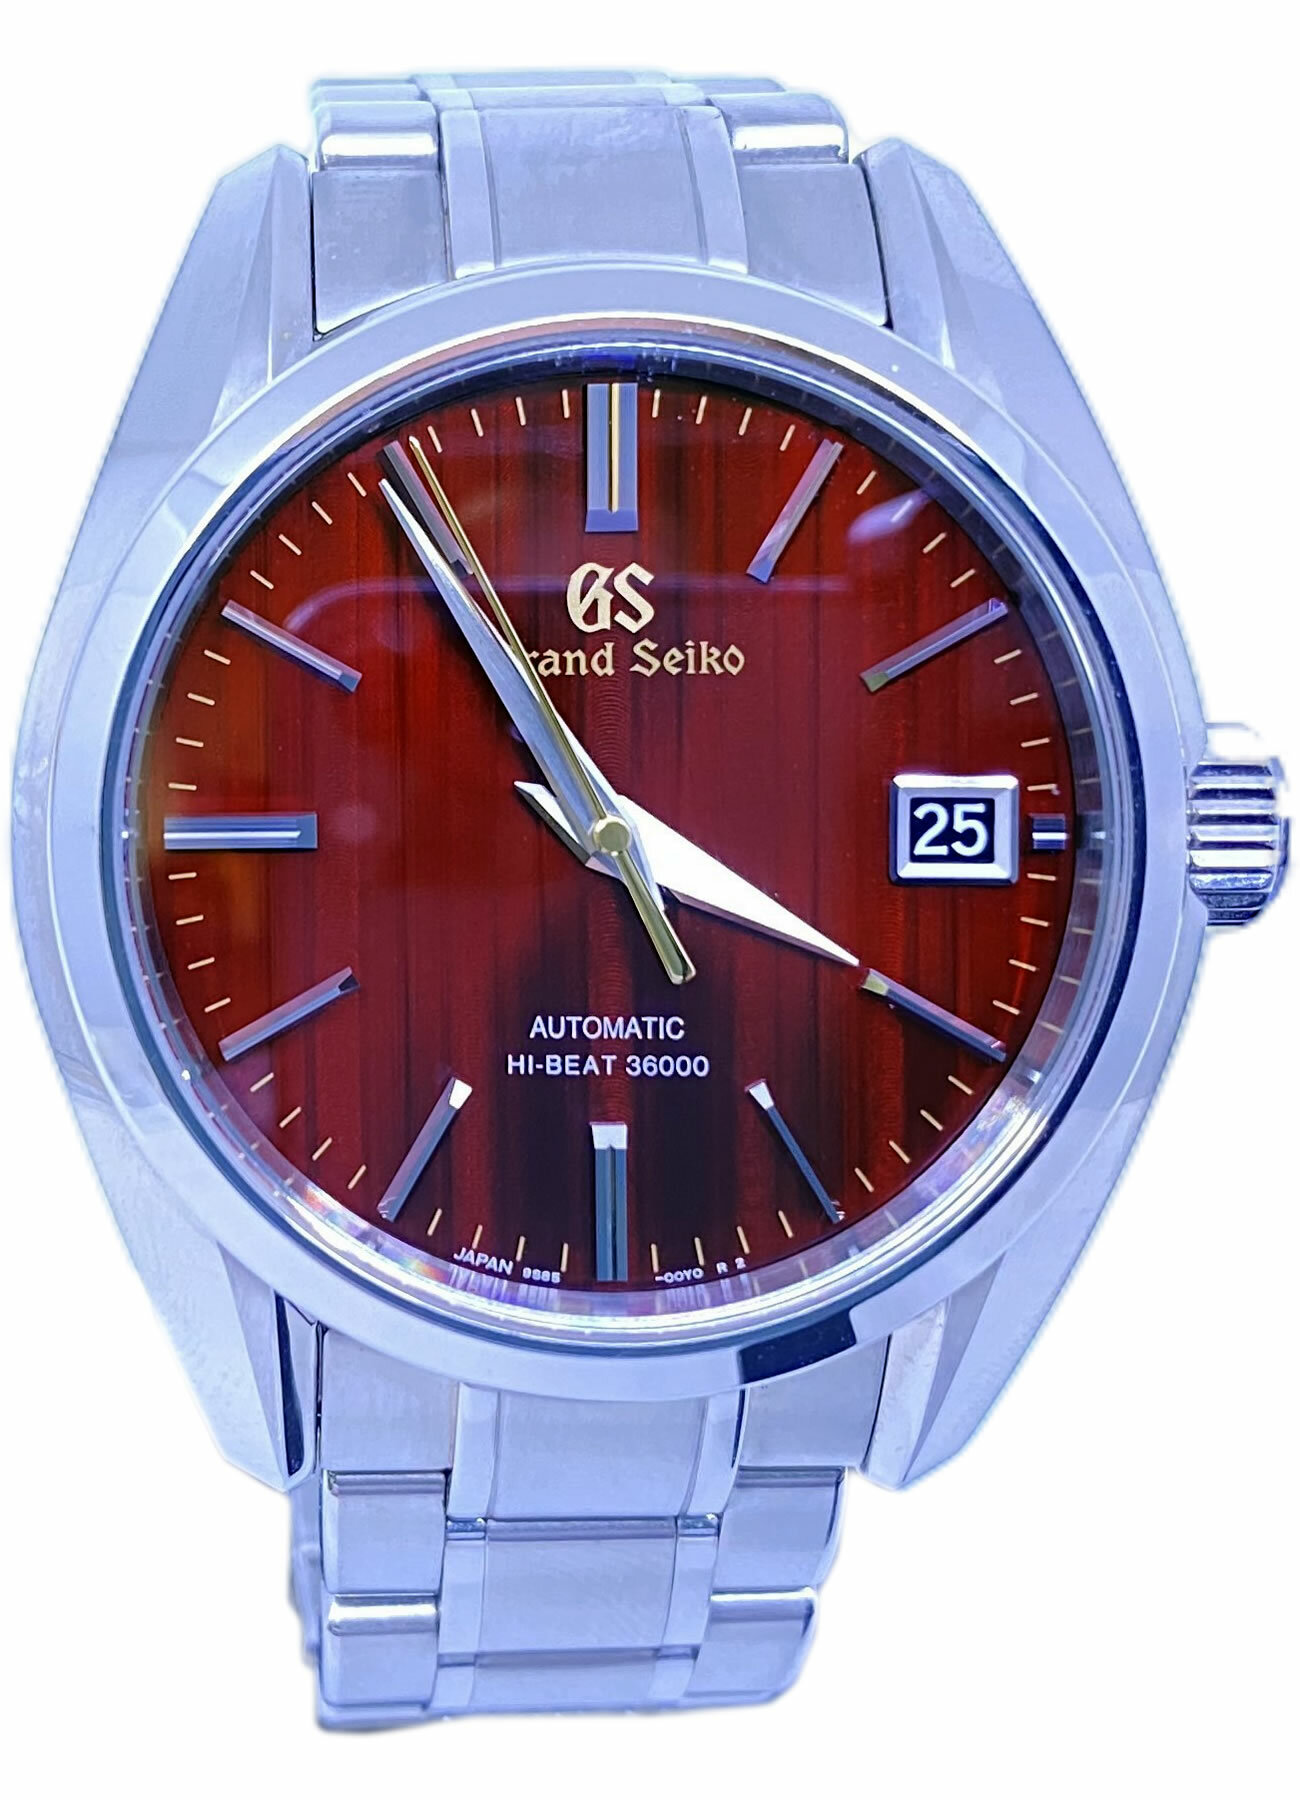 Grand Seiko SBGH269 Limited Edition - Exquisite Timepieces